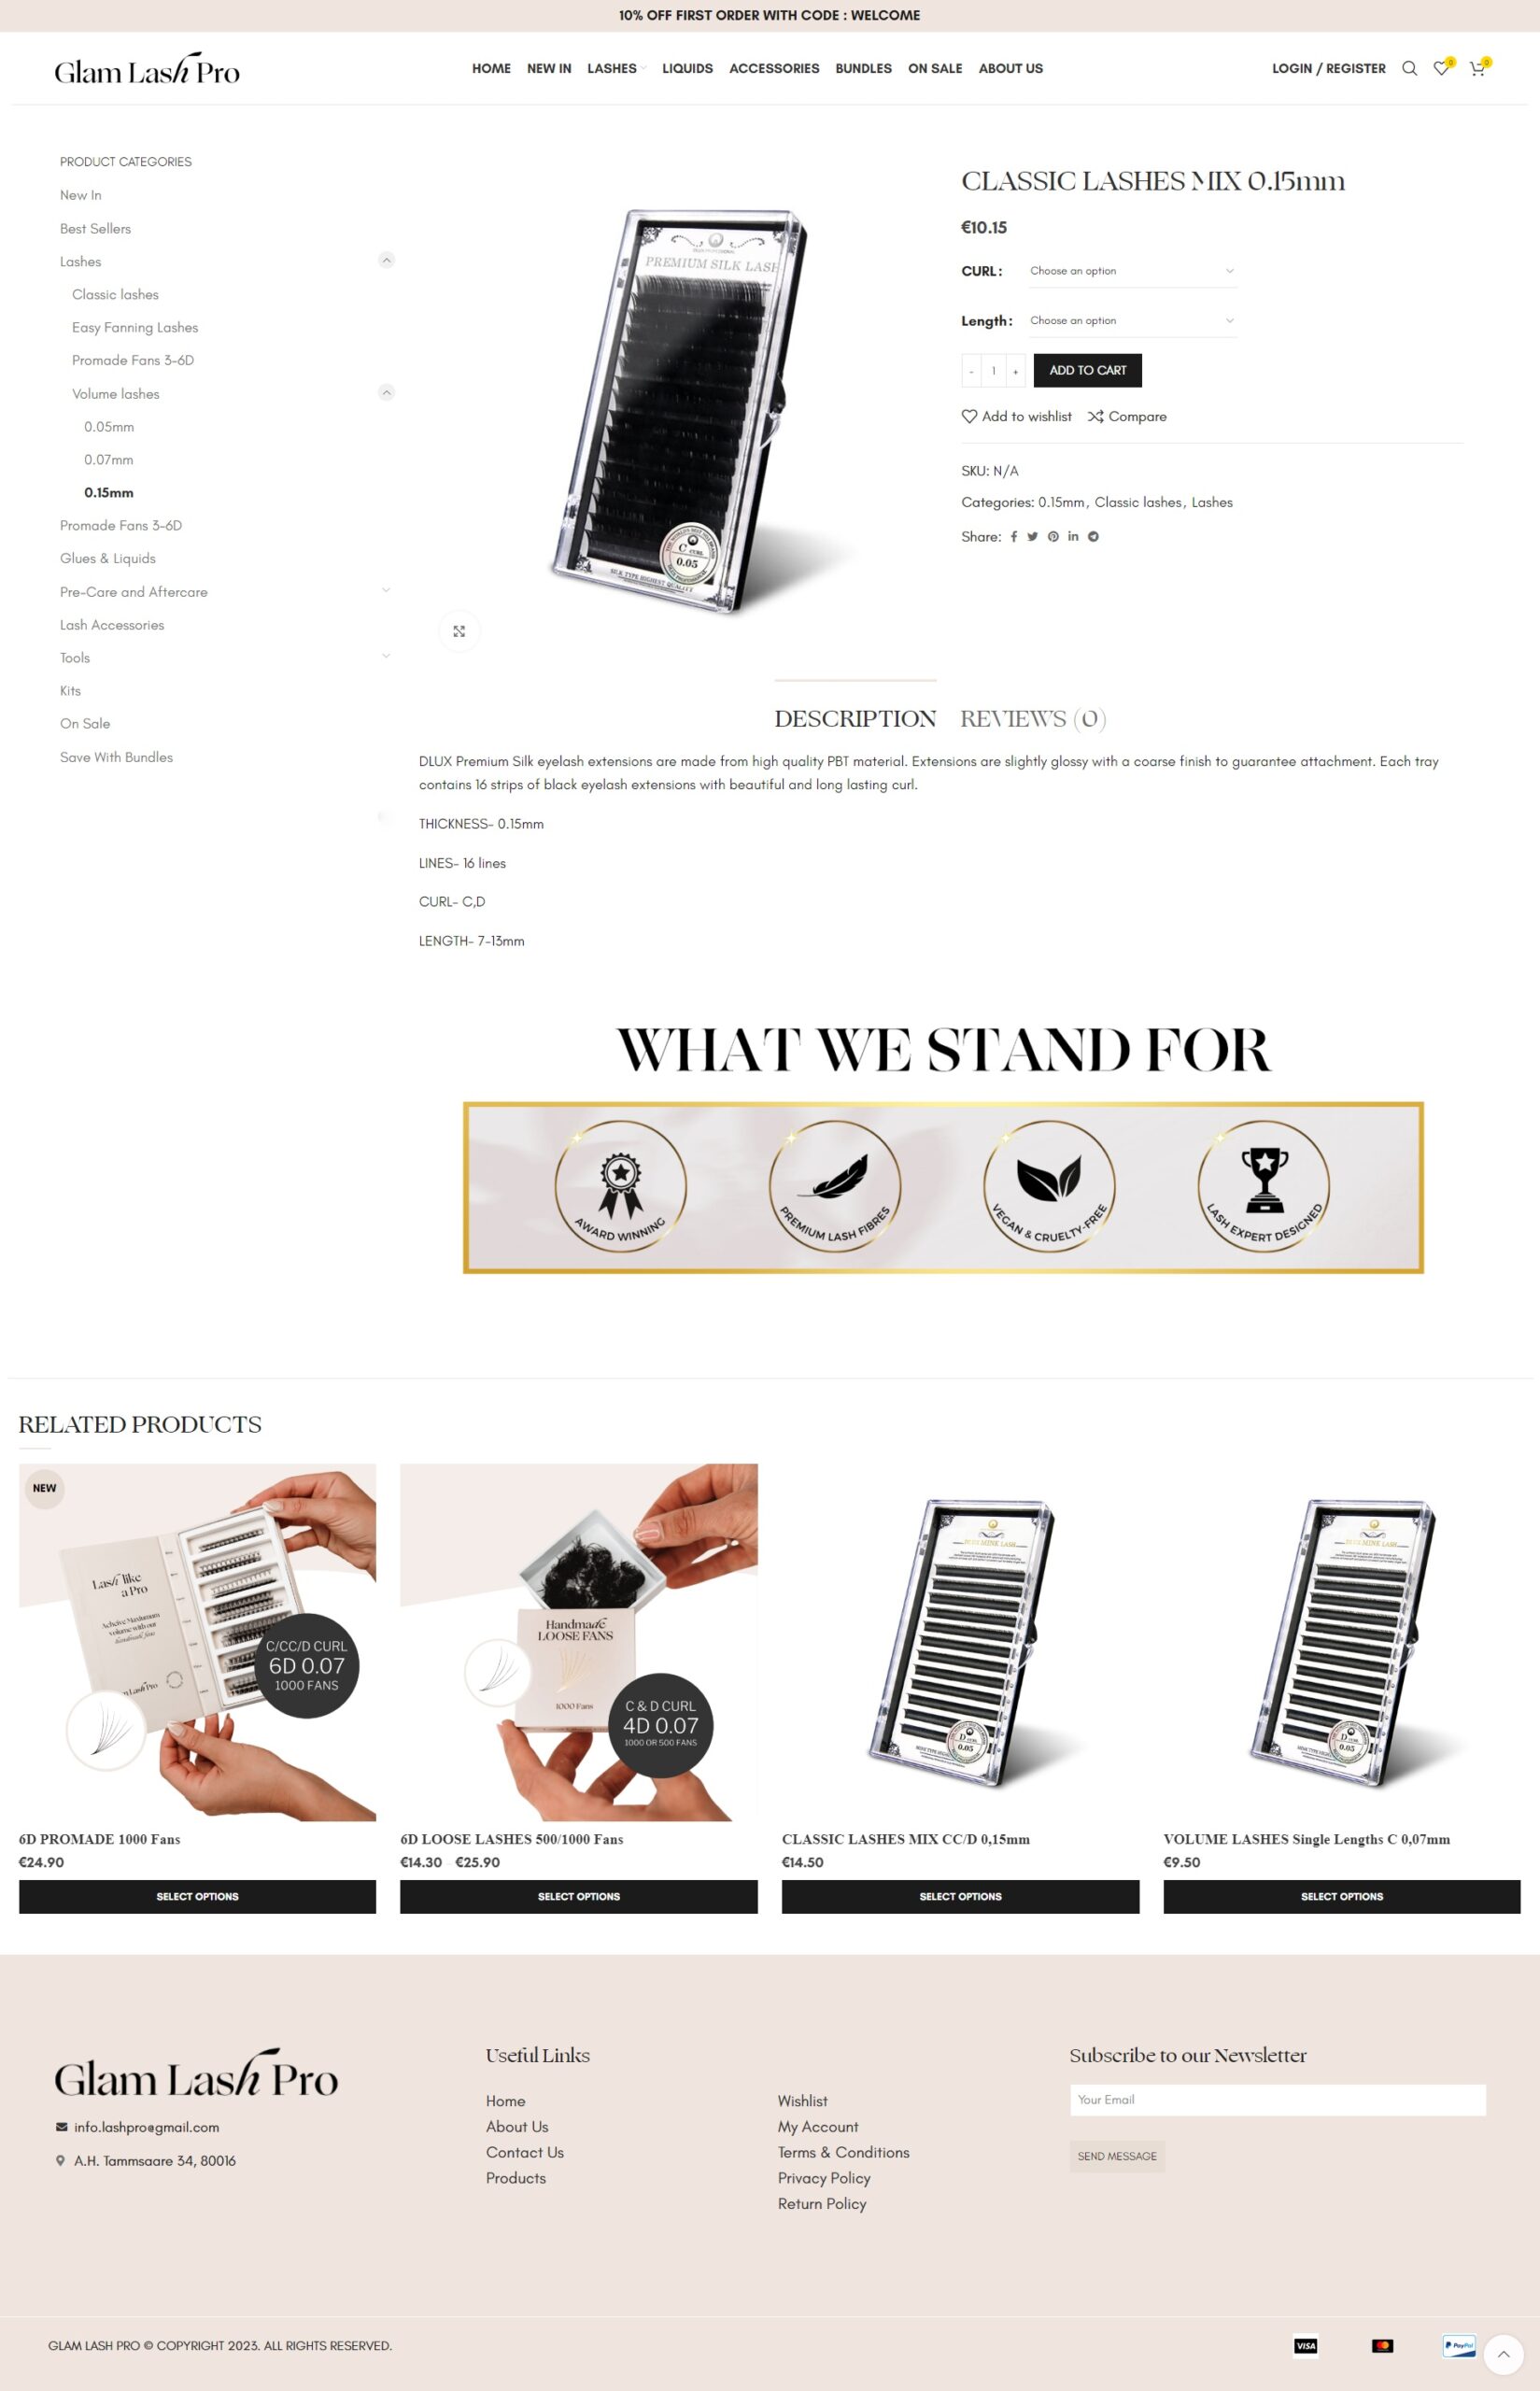 A single product page of GlamLash Pro website